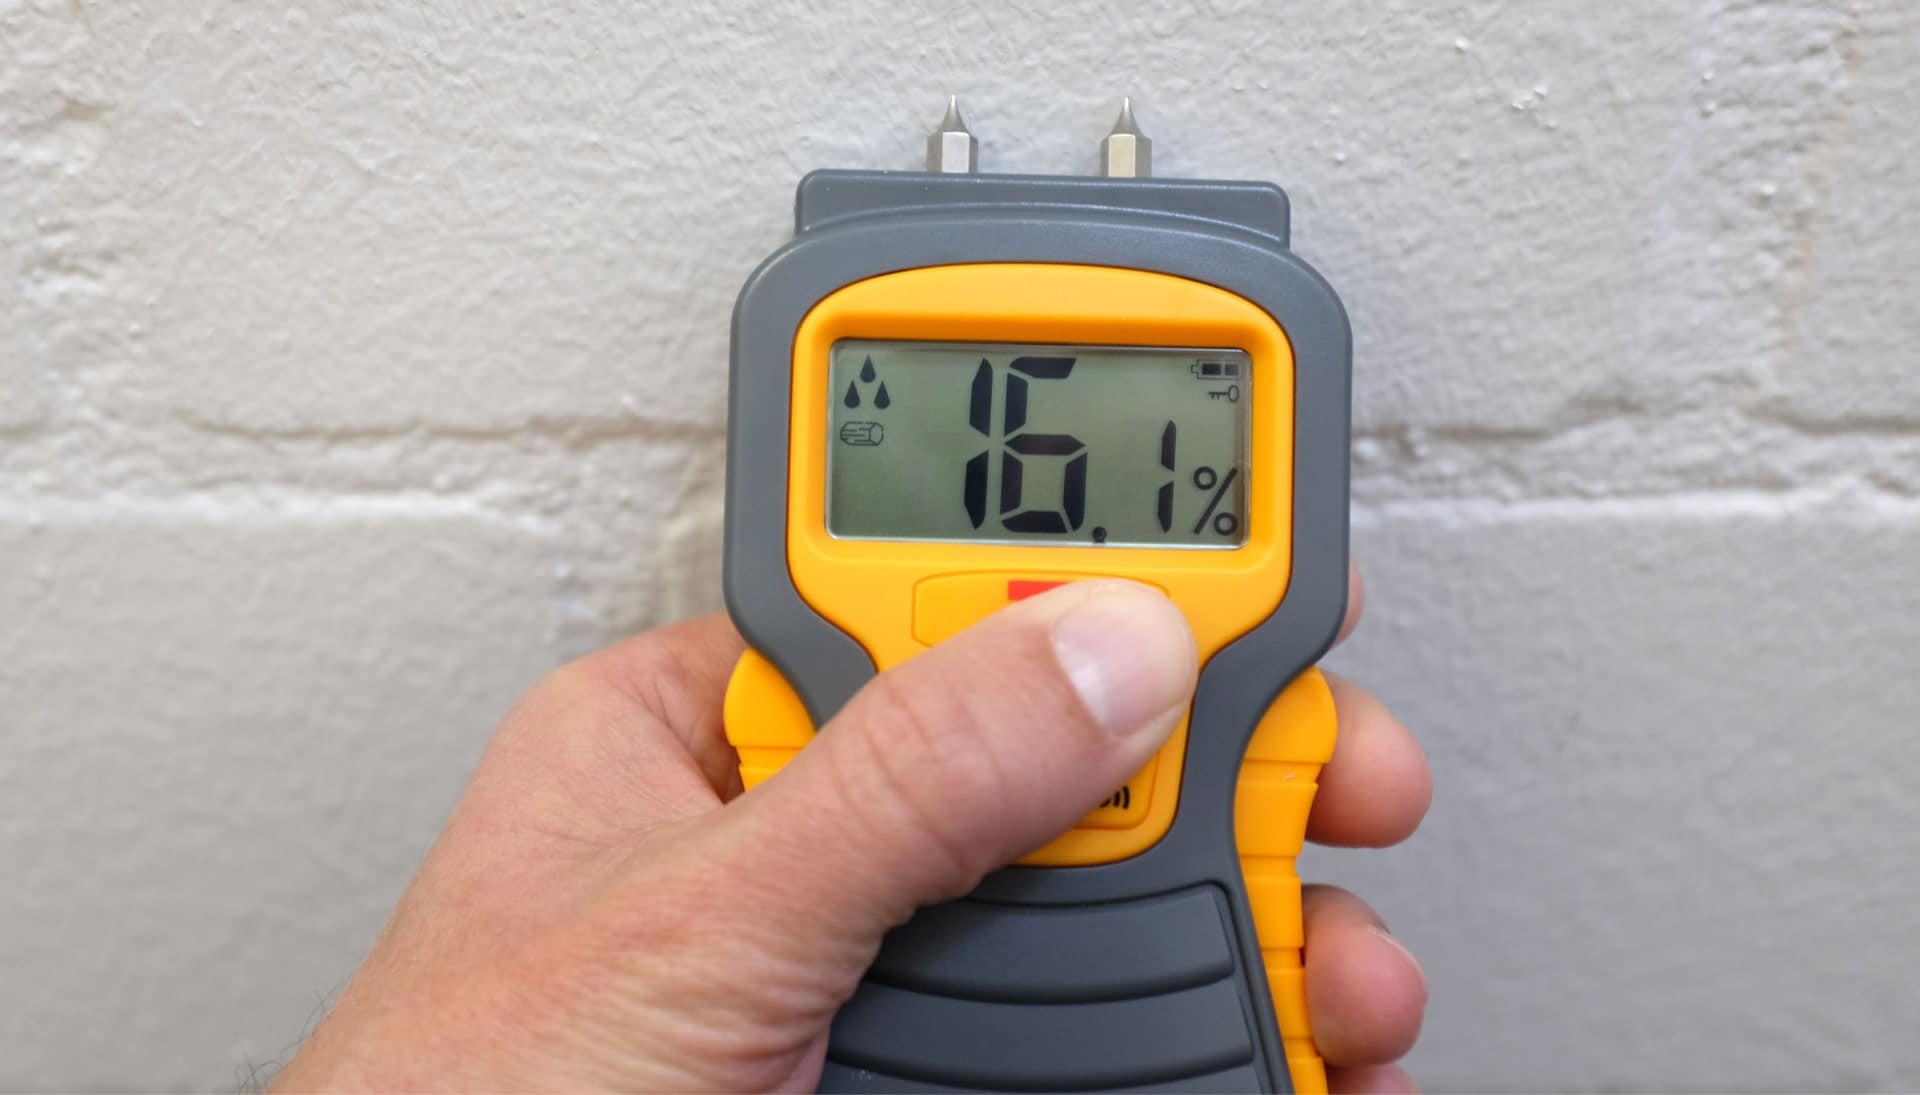 We provide fast, accurate, and affordable mold testing services in Pittsburgh, Pennsylvania.